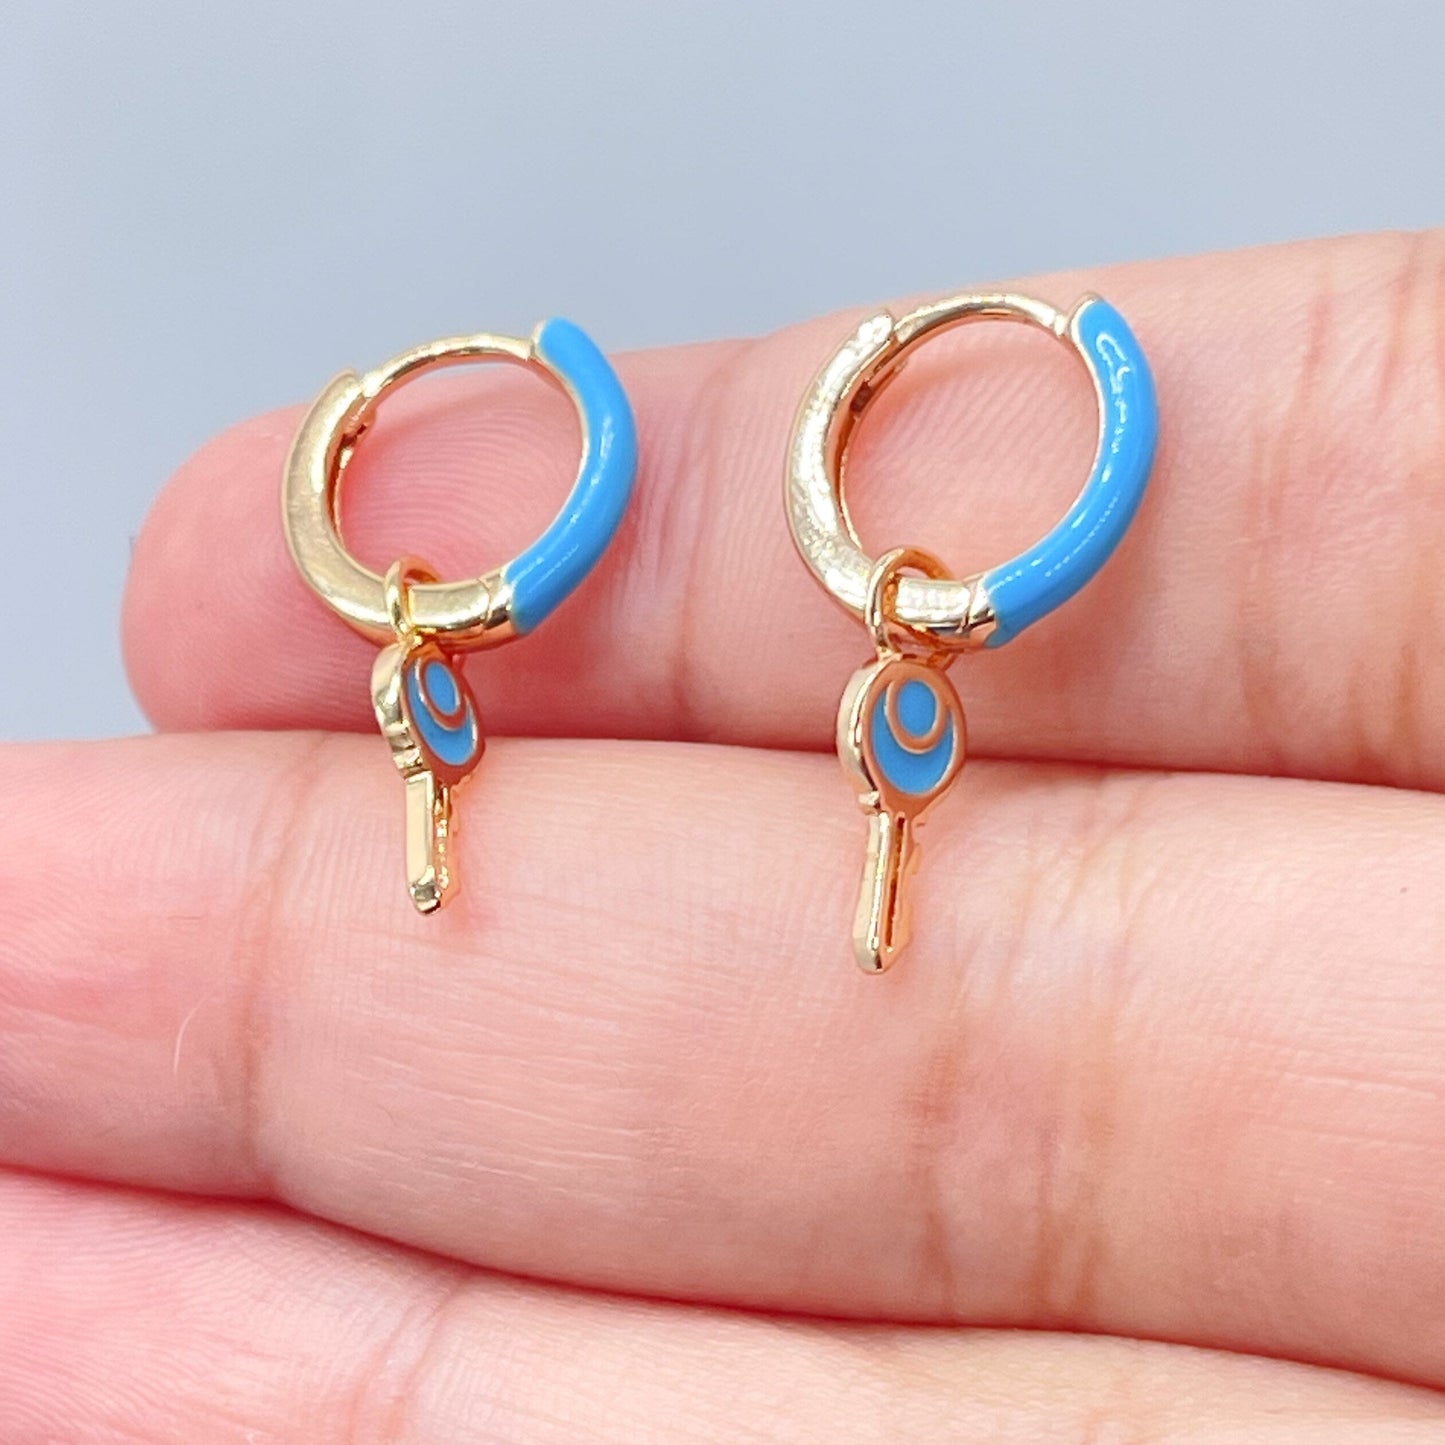 18k Gold Layered, Colorful Earrings with Dangling Key Clicker Colored Hoops